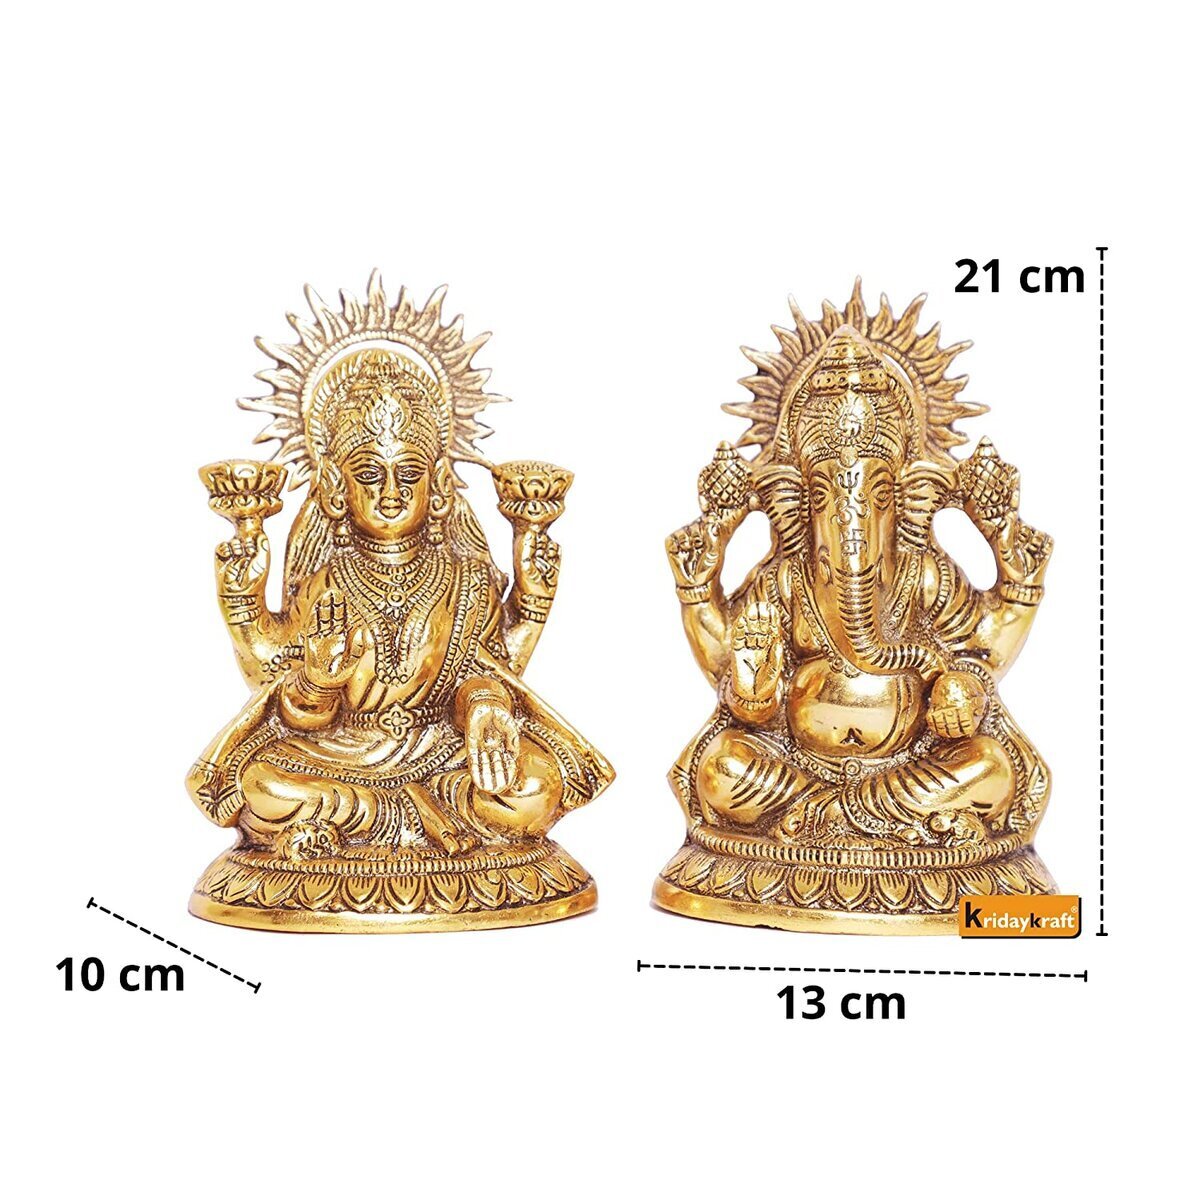 Radhna Gold Plated Metal Handicraft Laxmi Ganesh Idol with Tree and Diya for Puja Home Mandir Temple and Decorative Showpiece for Living Drawing Bed Room Office Shop Decorative and Gifts 